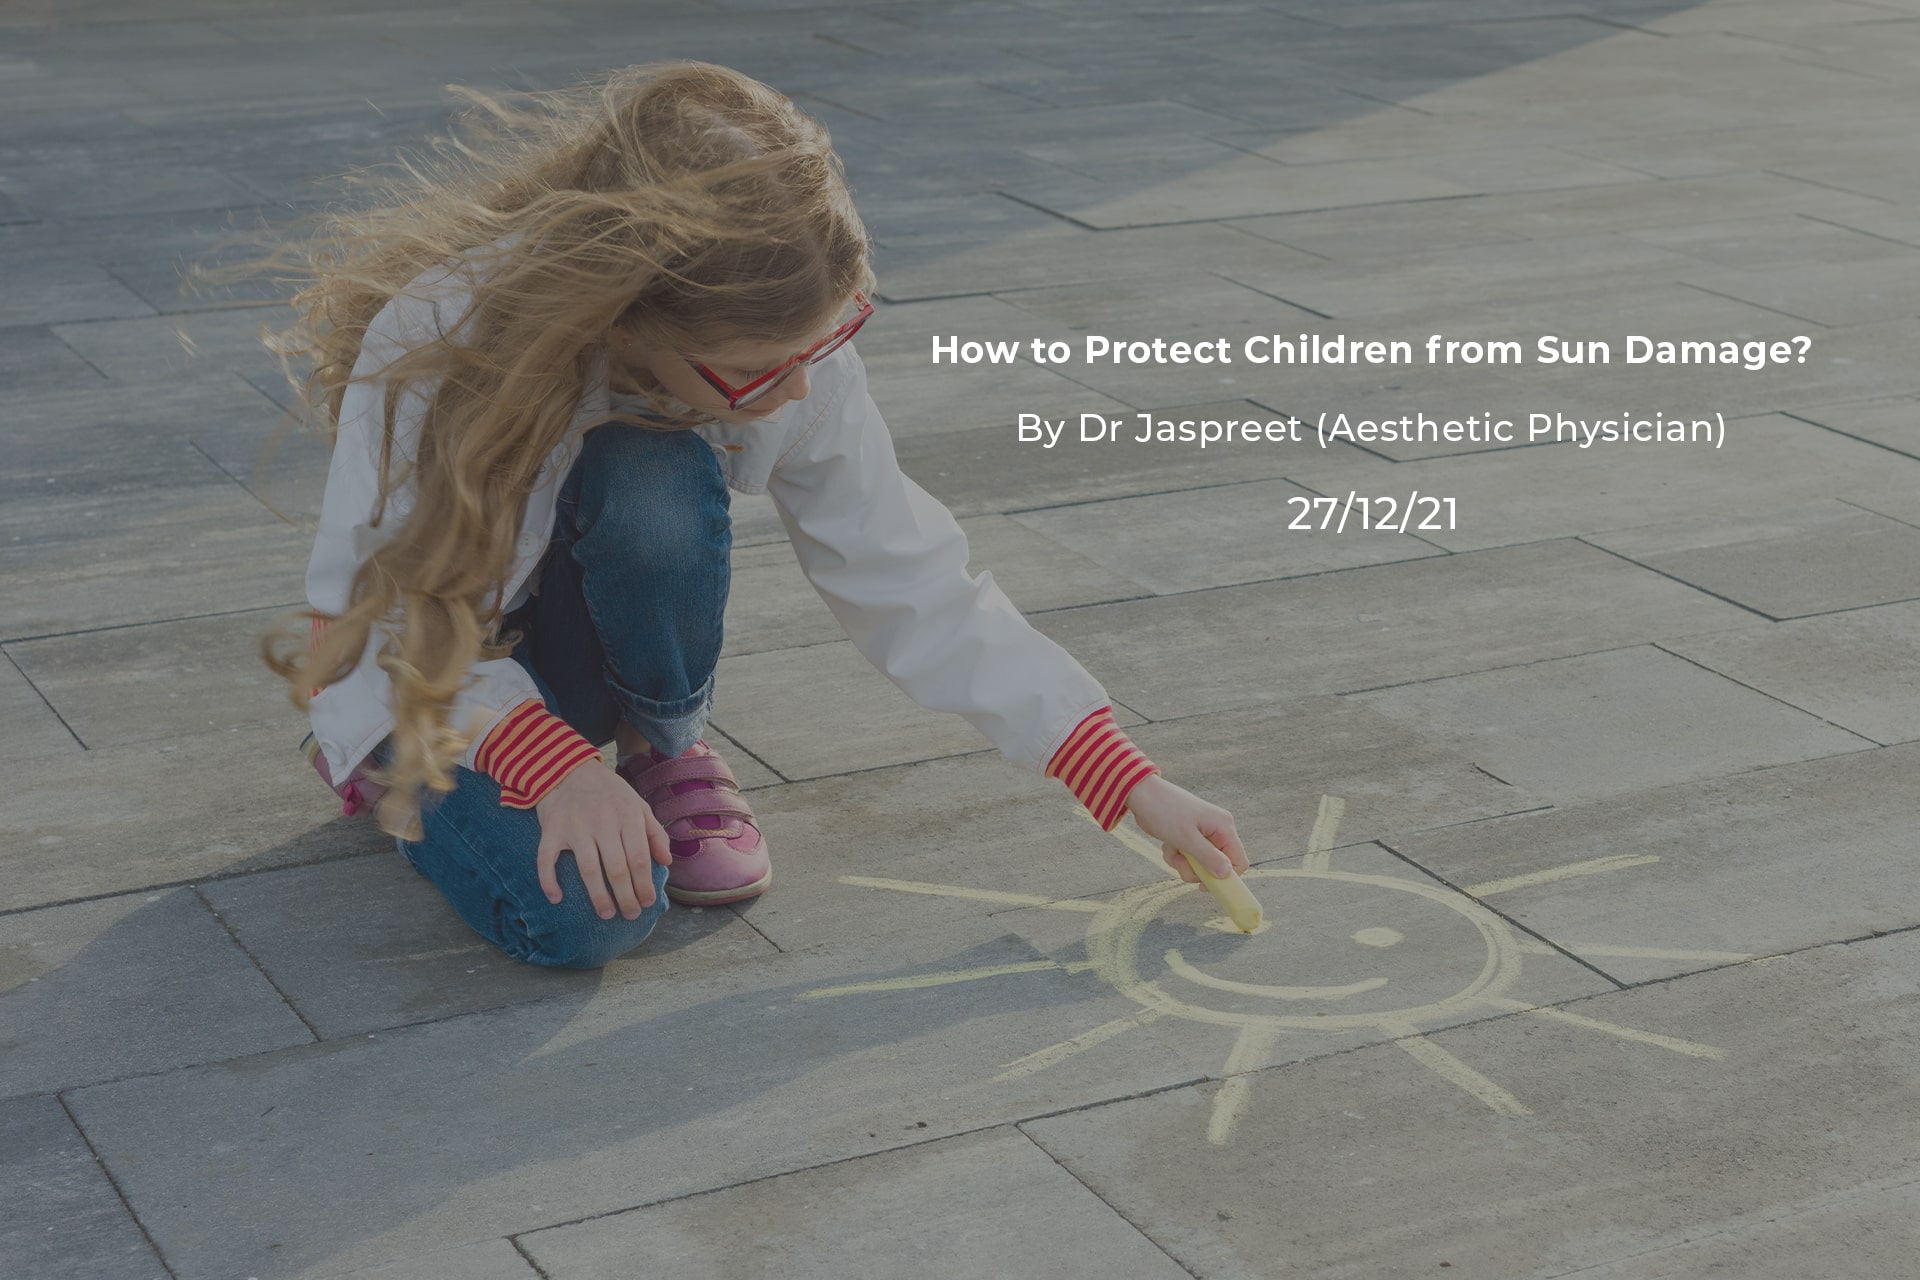 How to Protect Children from Sun Damage?